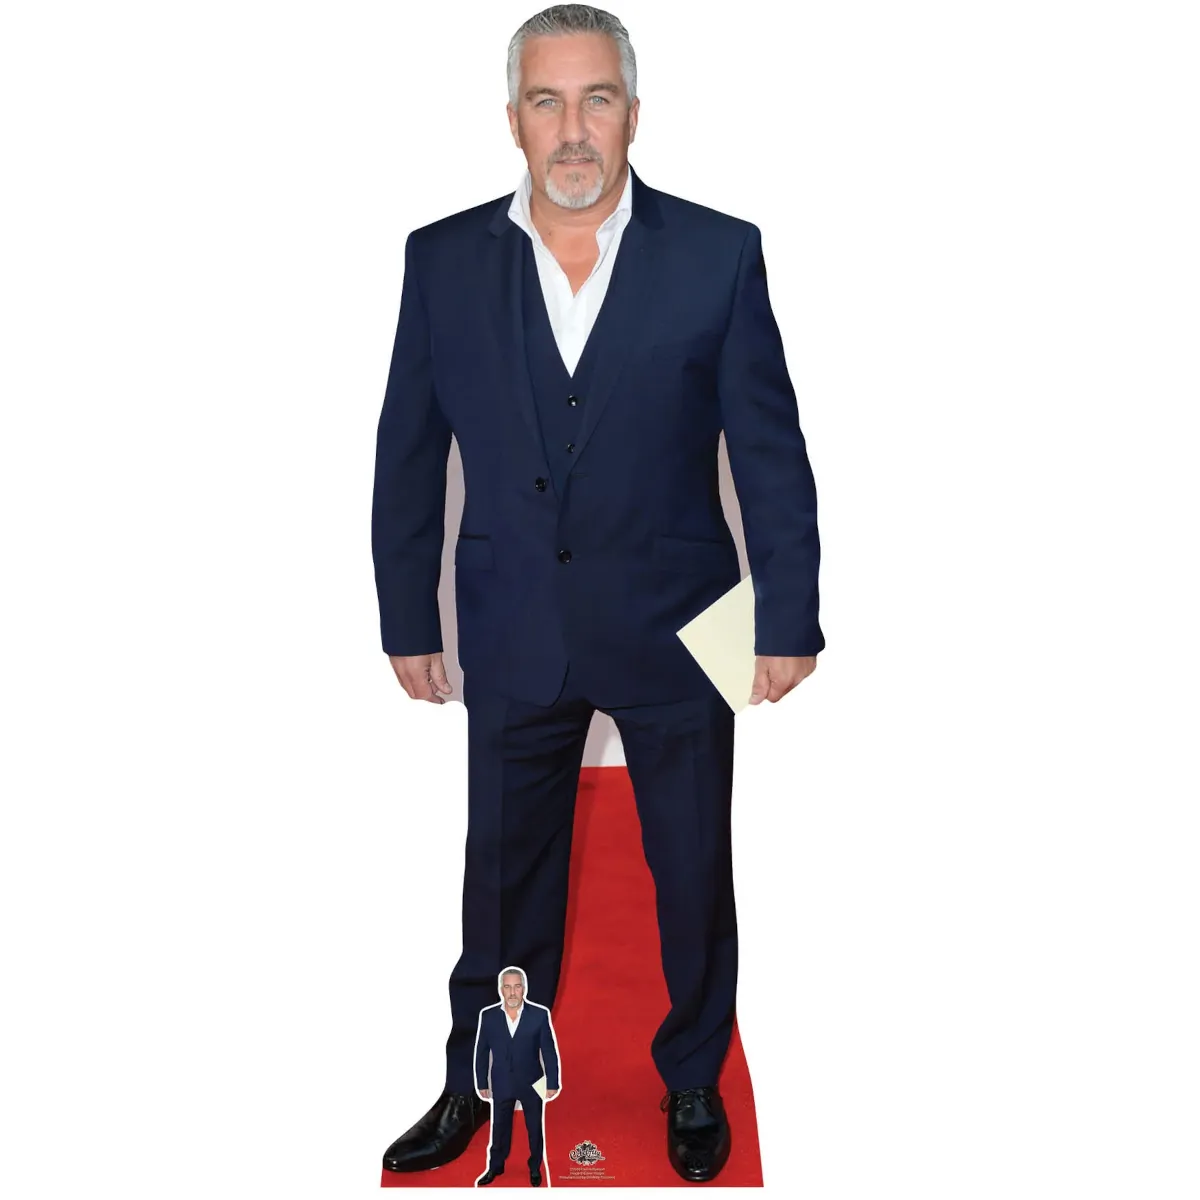 CS644 Paul Hollywood 'Blue Suit' (Celebrity Chef) Lifesize + Mini Cardboard Cutout Standee Front